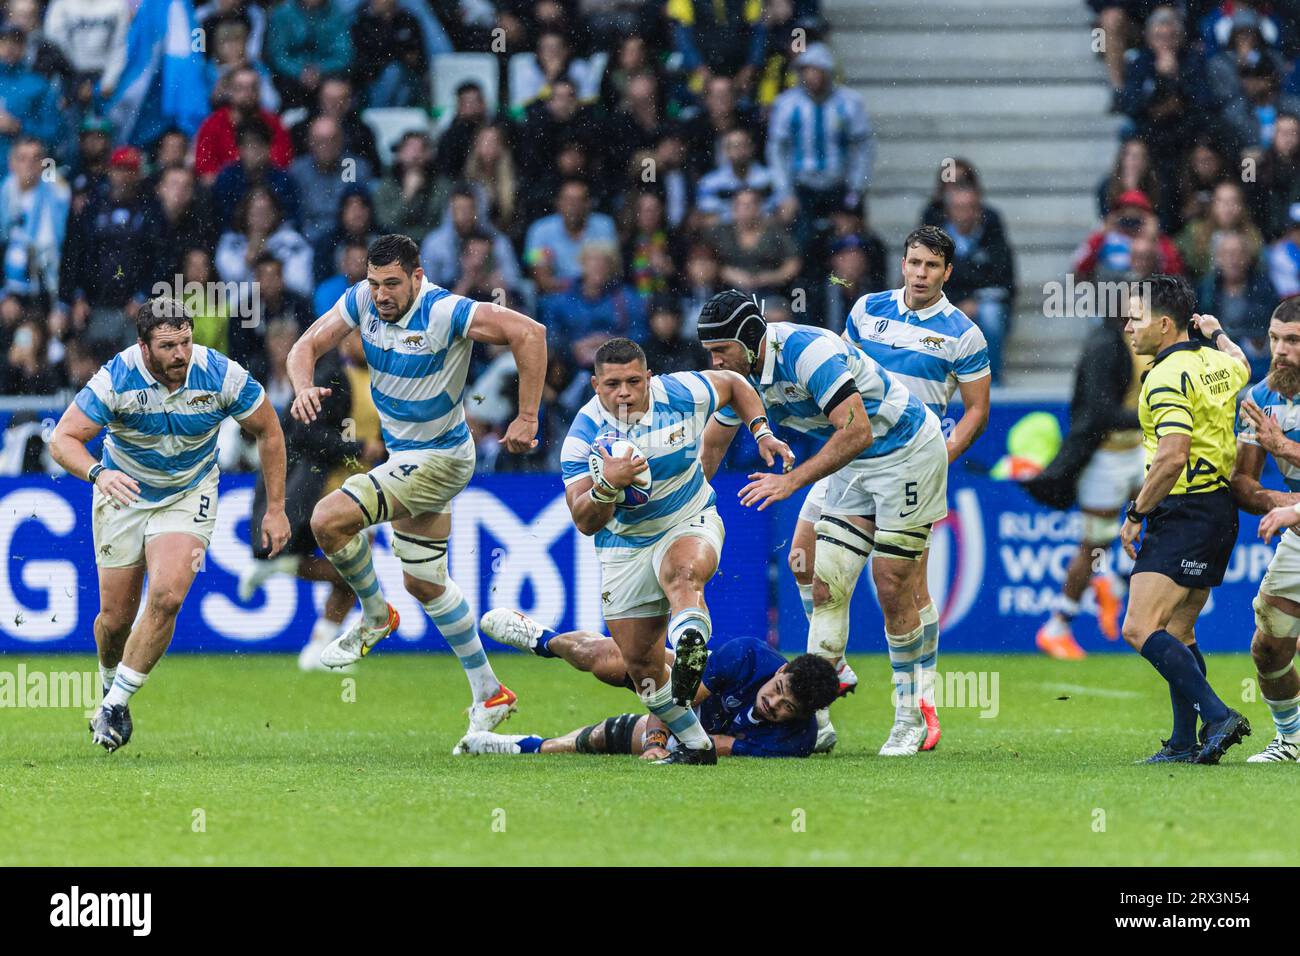 Saint-Étienne, France. 22nd September, 2023. Thomas Gallo of Argentina runs with the ball during the Rugby World Cup Pool D match between Argentina and Samoa at Stade Geoffroy-Guichard. Credit: Mateo Occhi (Sporteo) / Alamy Live News Stock Photo